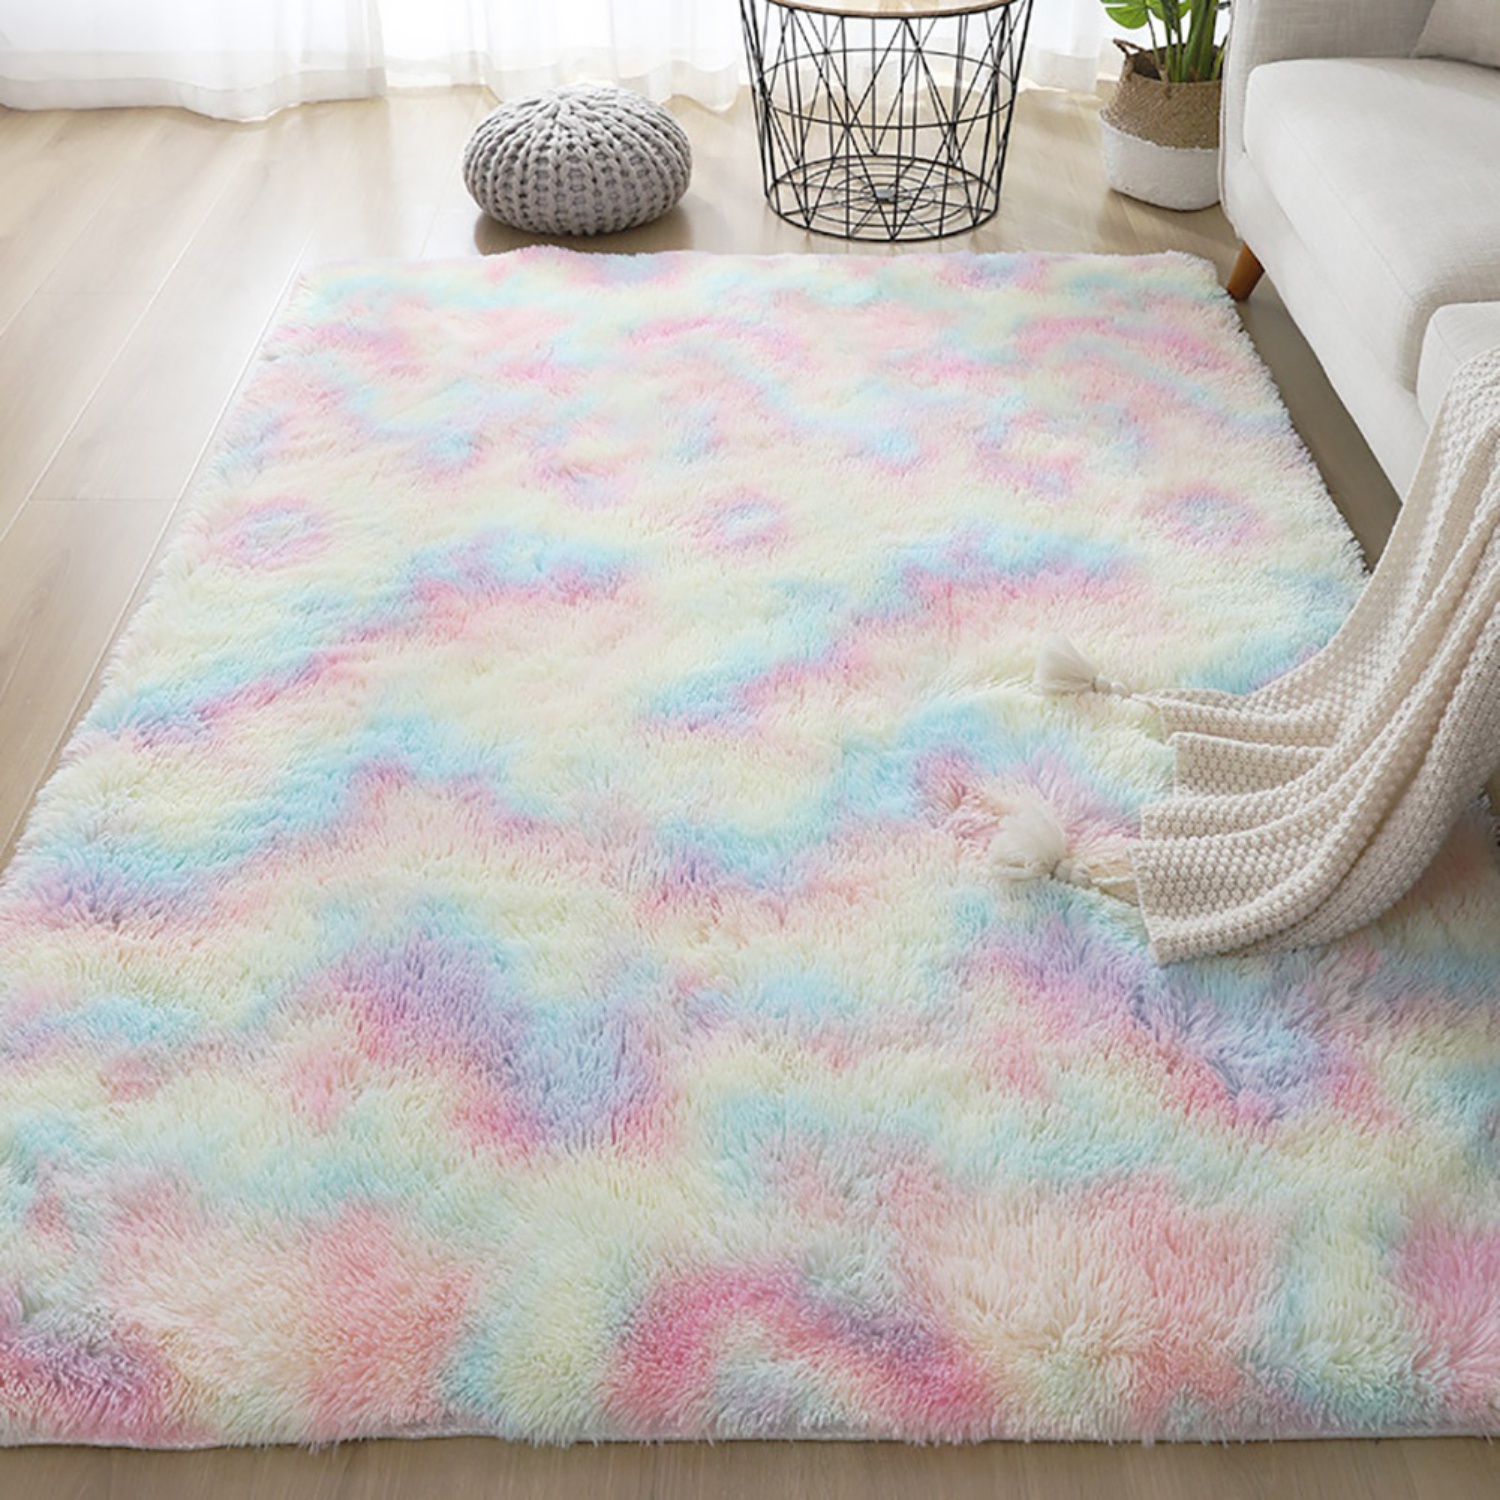 Rainbow Area Rug for Kids Play Room Warm Soft Luxury Rug Plush Throw Rugs High Pile Rug Handmade Knitted Nursery Decoration Rugs Baby Care Crawling Carpet, 3ft x 5ft - image 4 of 7